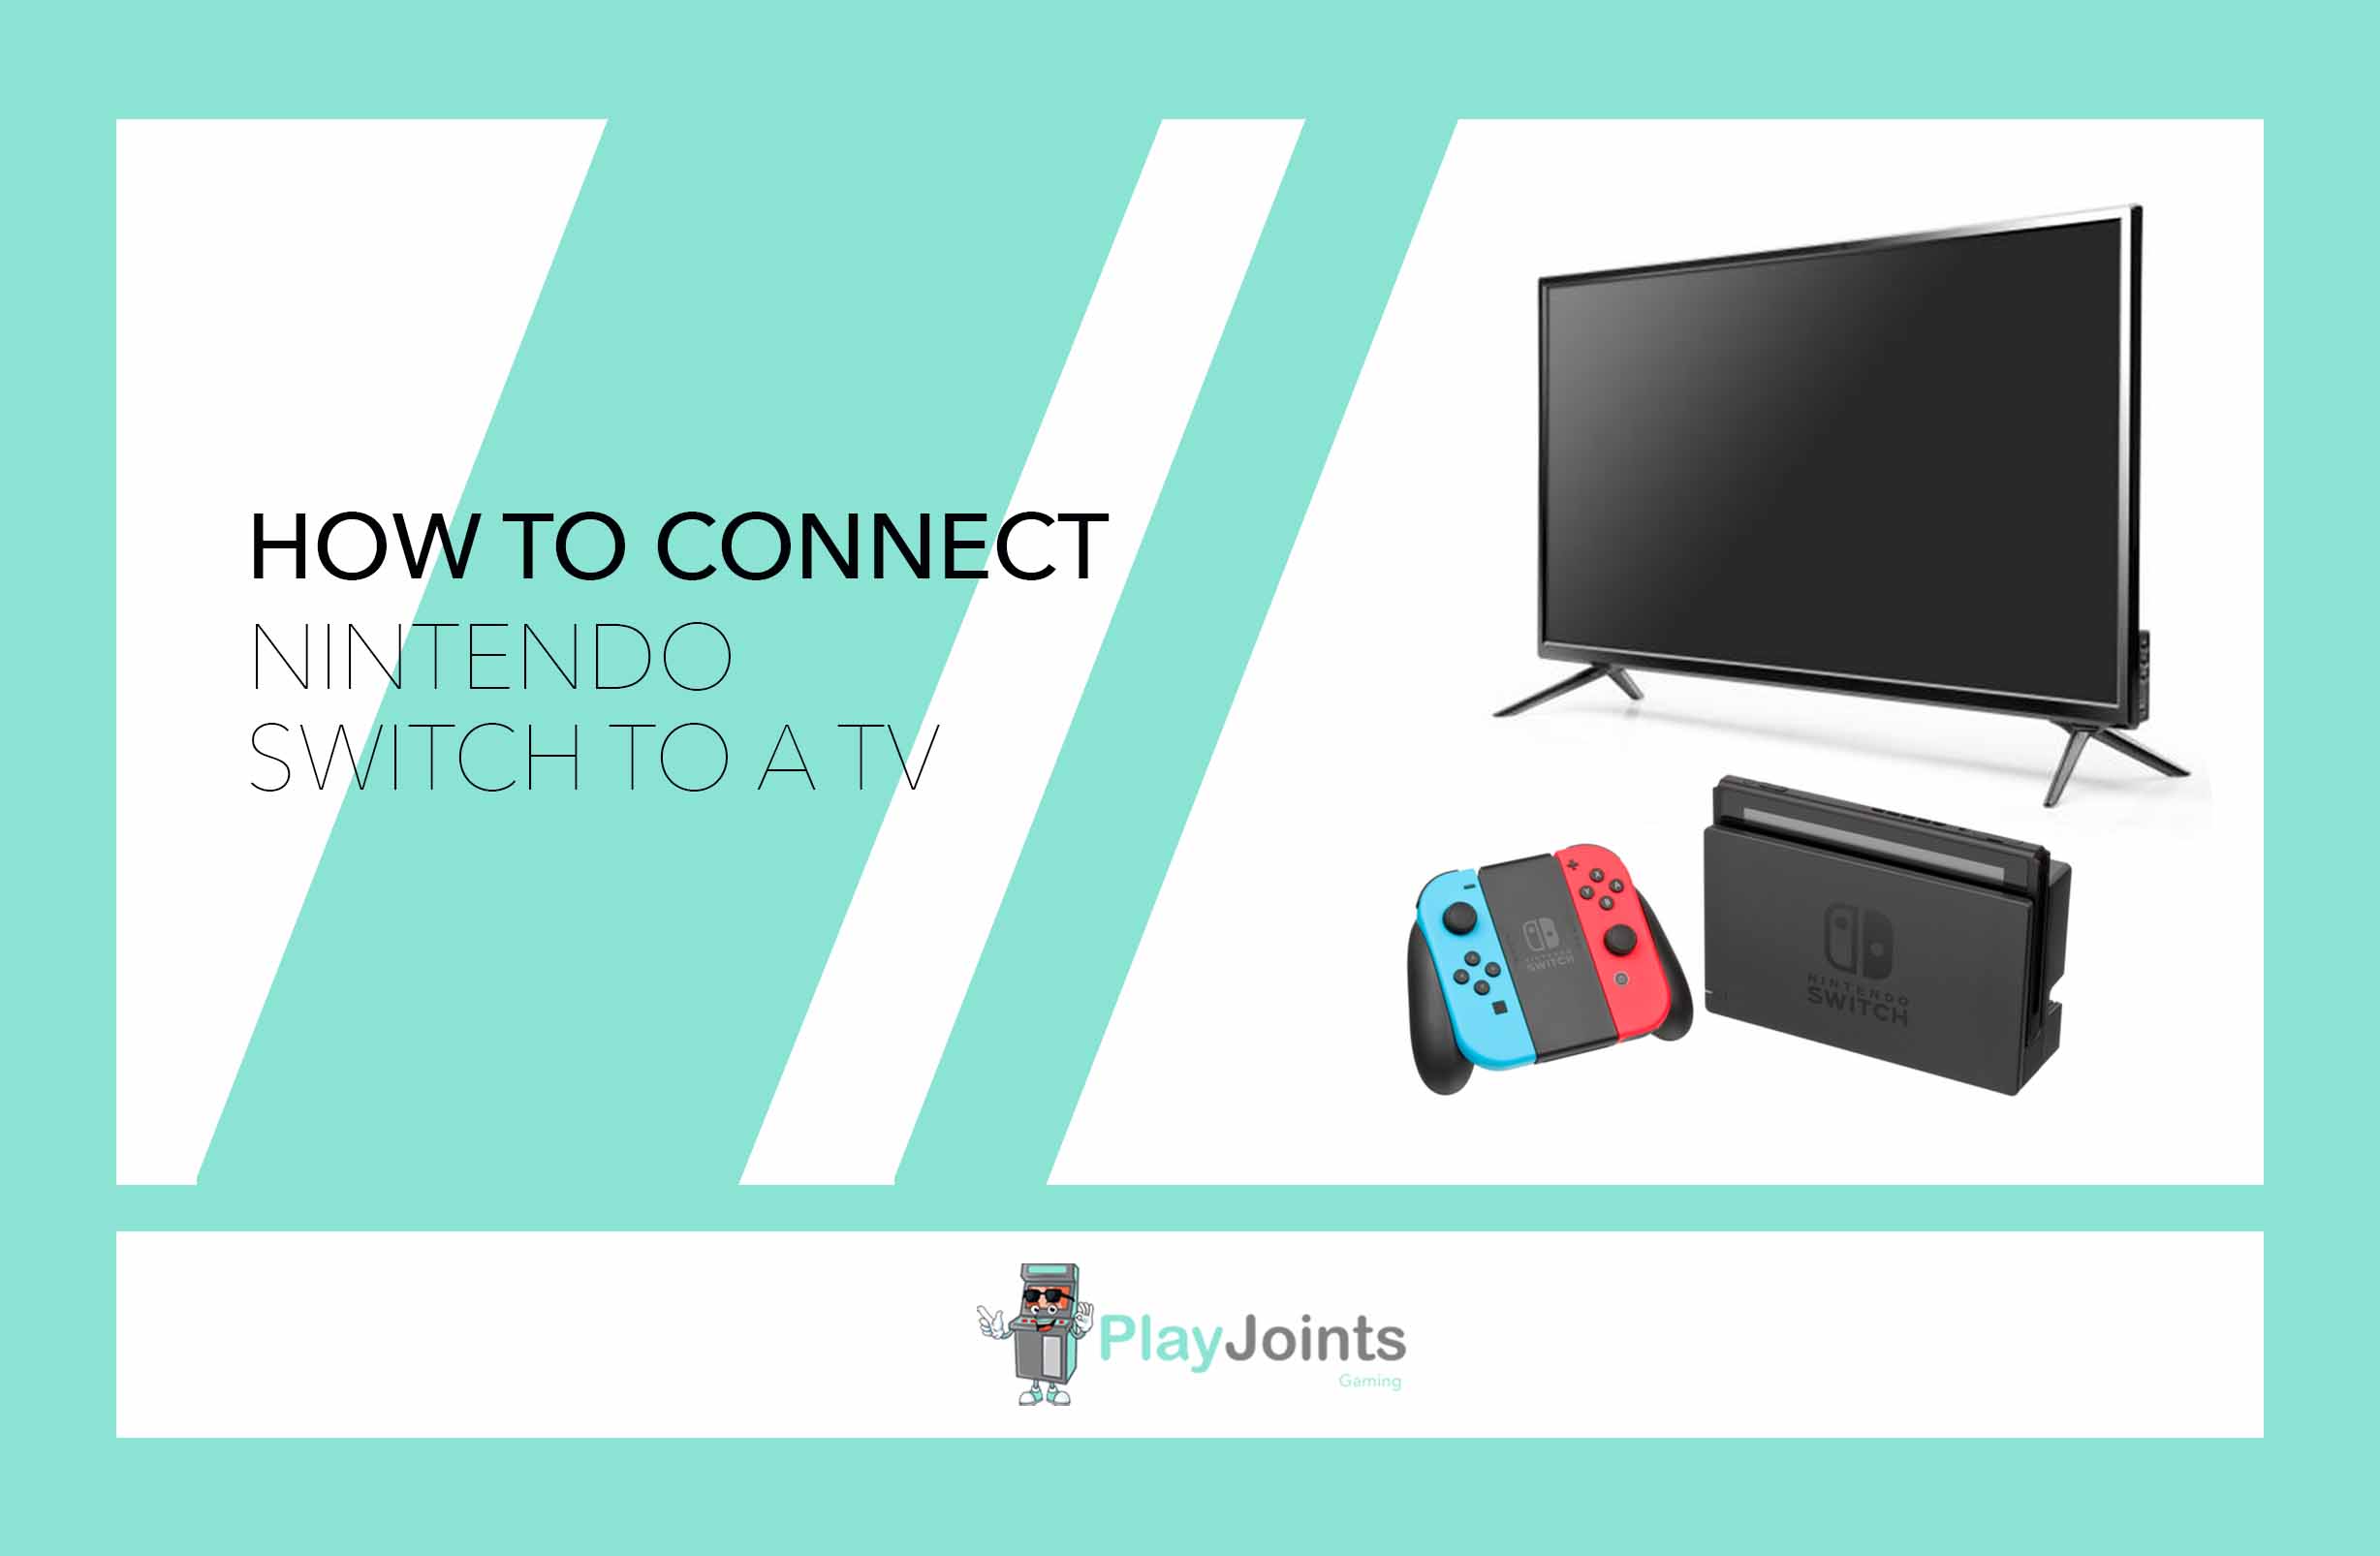 How to Connect Nintendo Switch to a TV